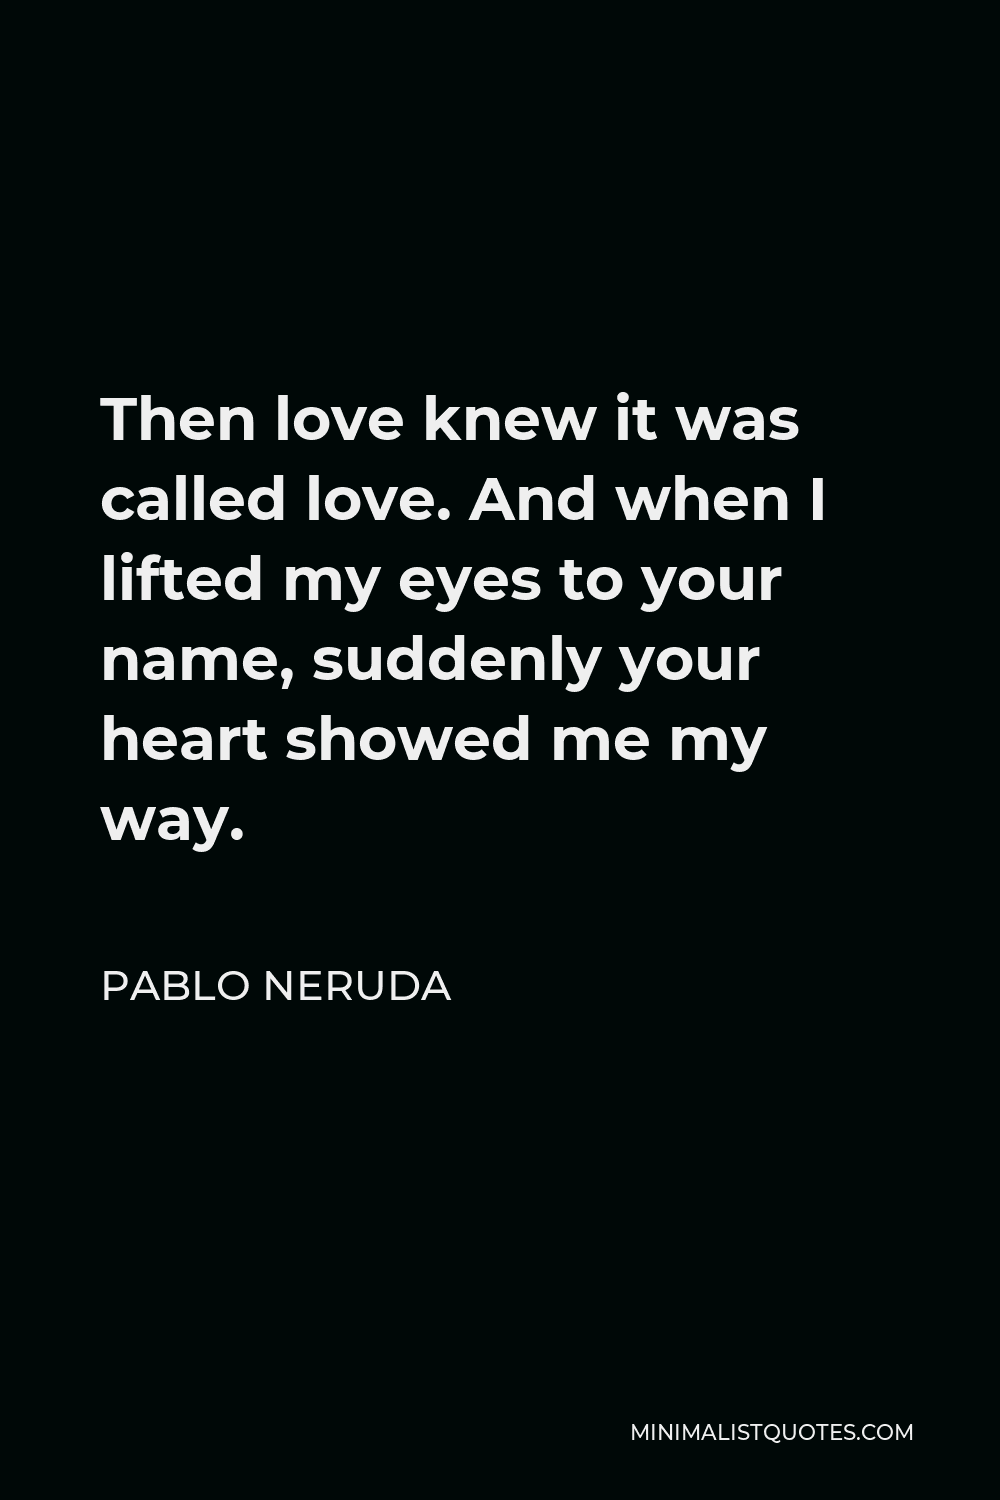 Pablo Neruda Quote - Then love knew it was called love. And when I lifted my eyes to your name, suddenly your heart showed me my way.